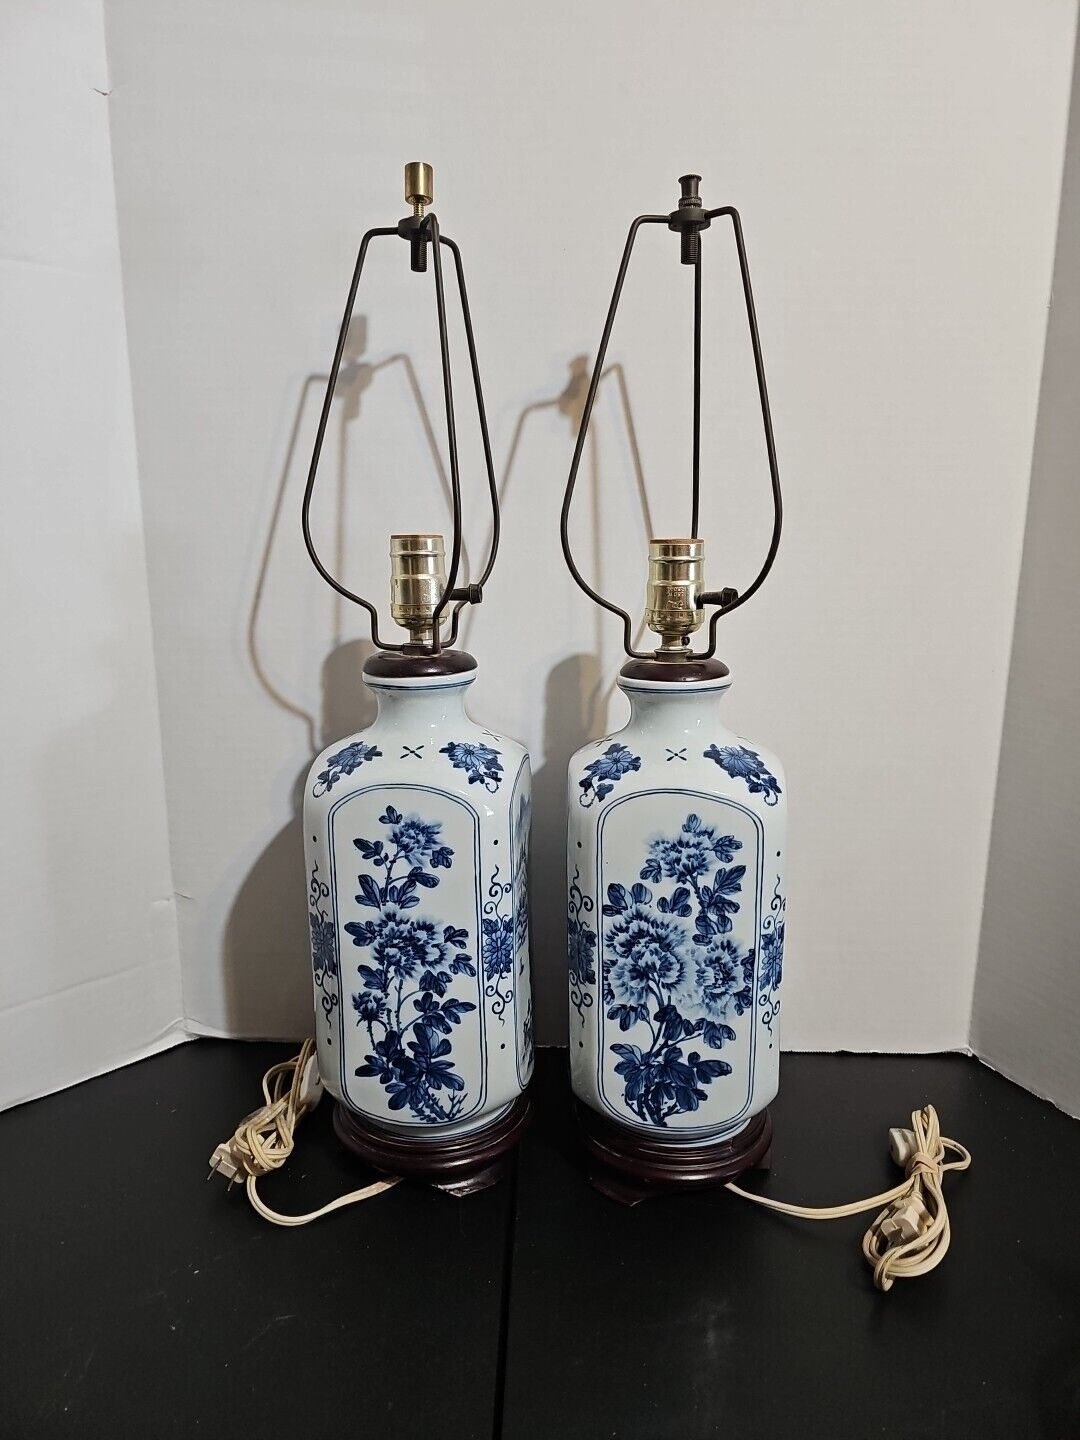  VINTAGE Pair of Japanese Style Floral White & Blue Porcelain Painted Lamps Work